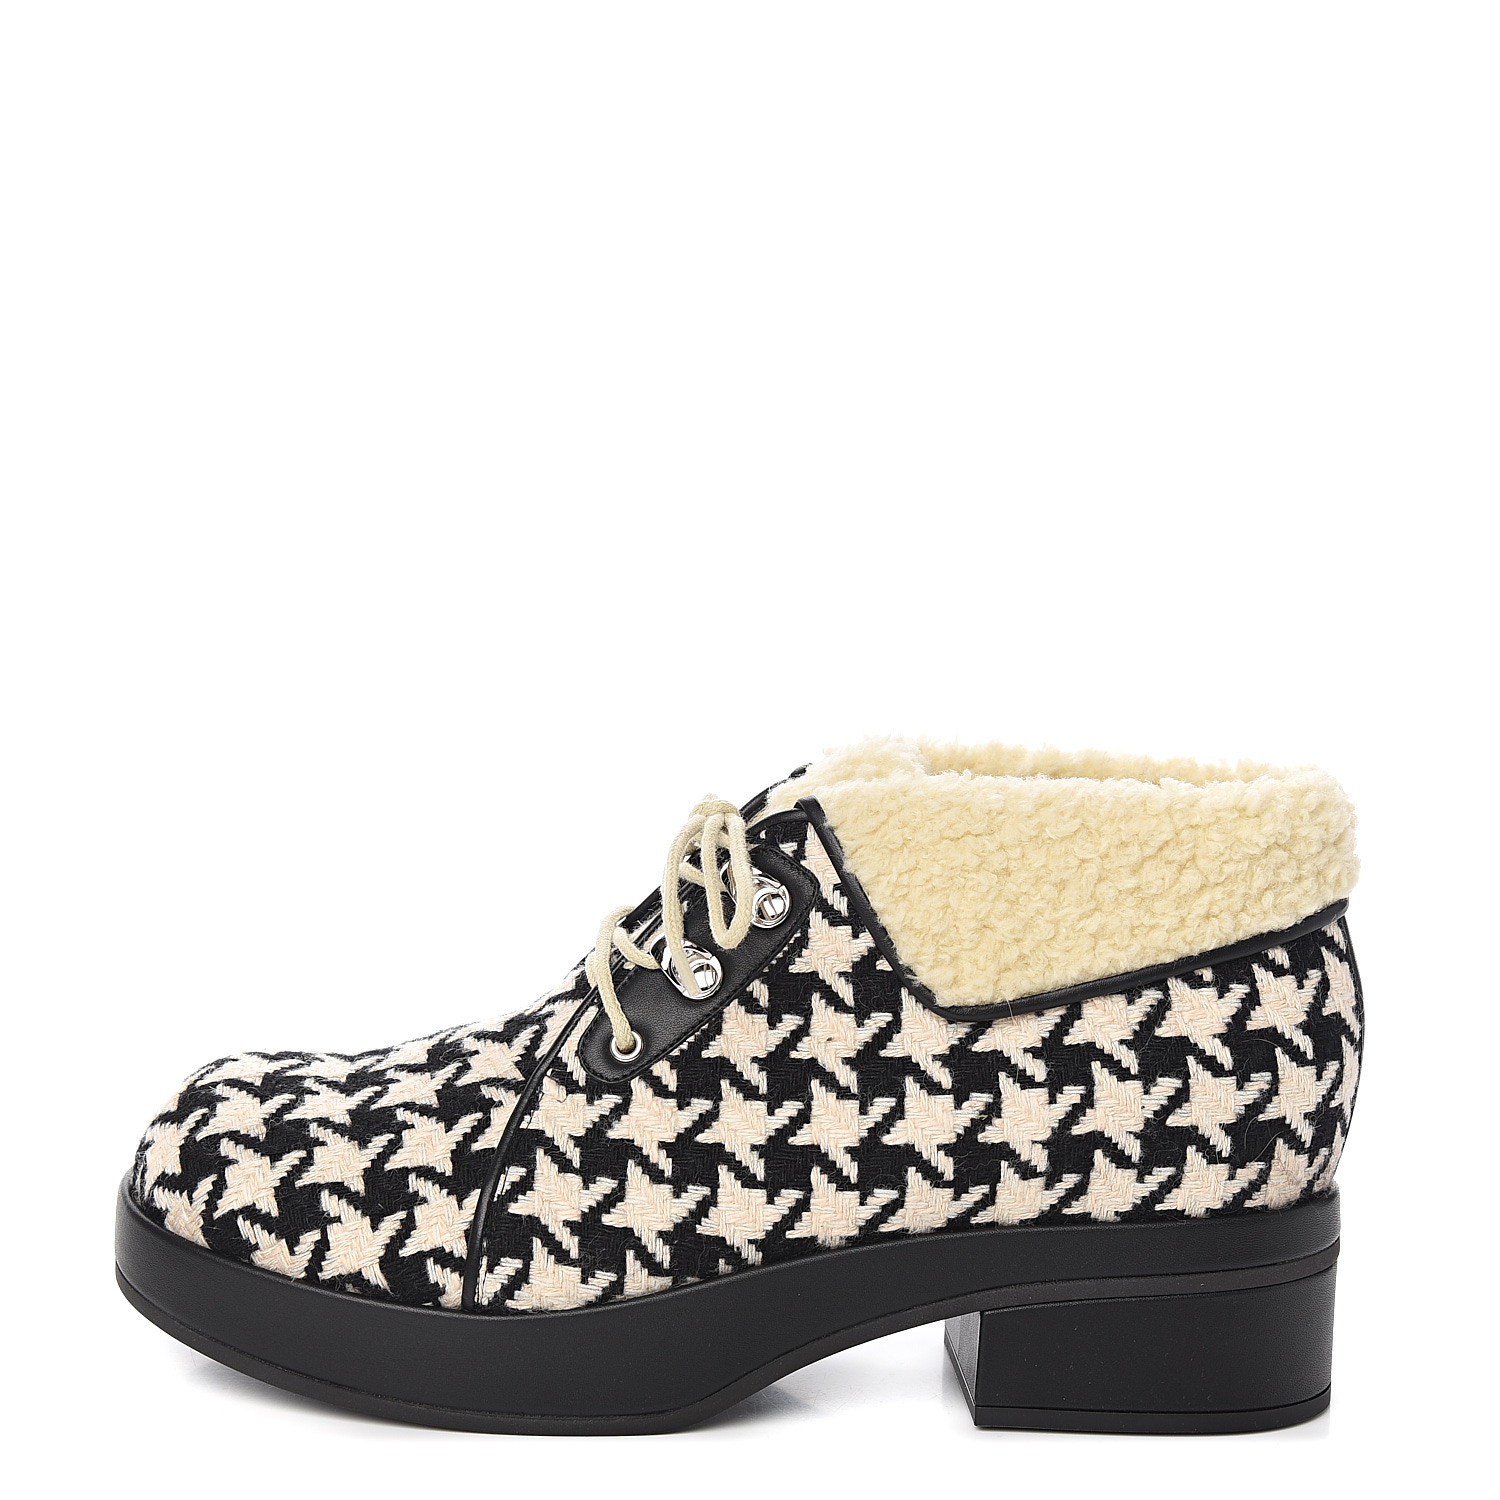 houndstooth boots black white